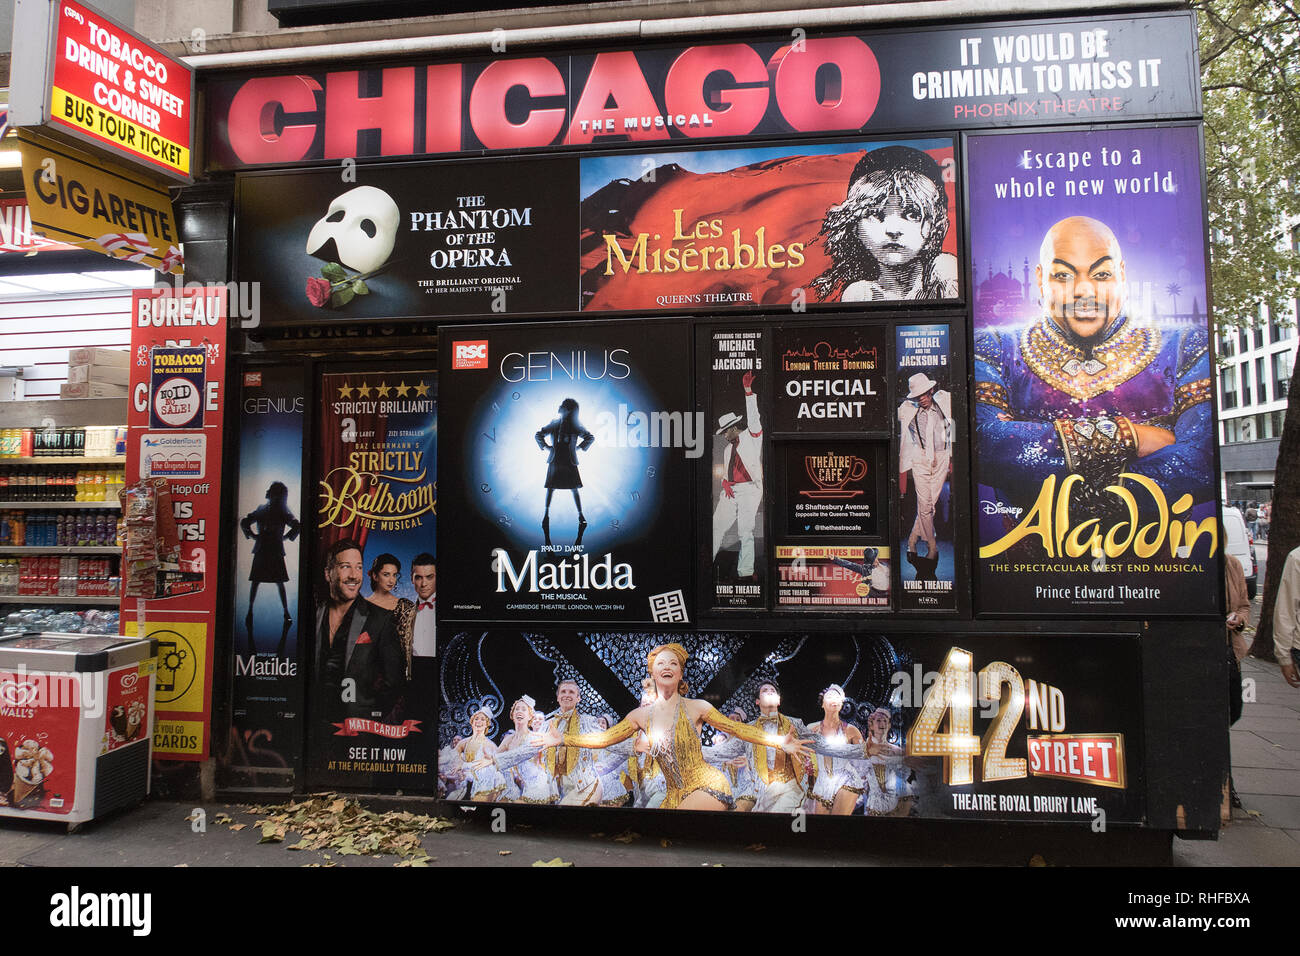 London, England - October 12, 2018: posters and flyers advertising musical shows like chicago, aladdin and Matilda on a wall in the corner of a street Stock Photo